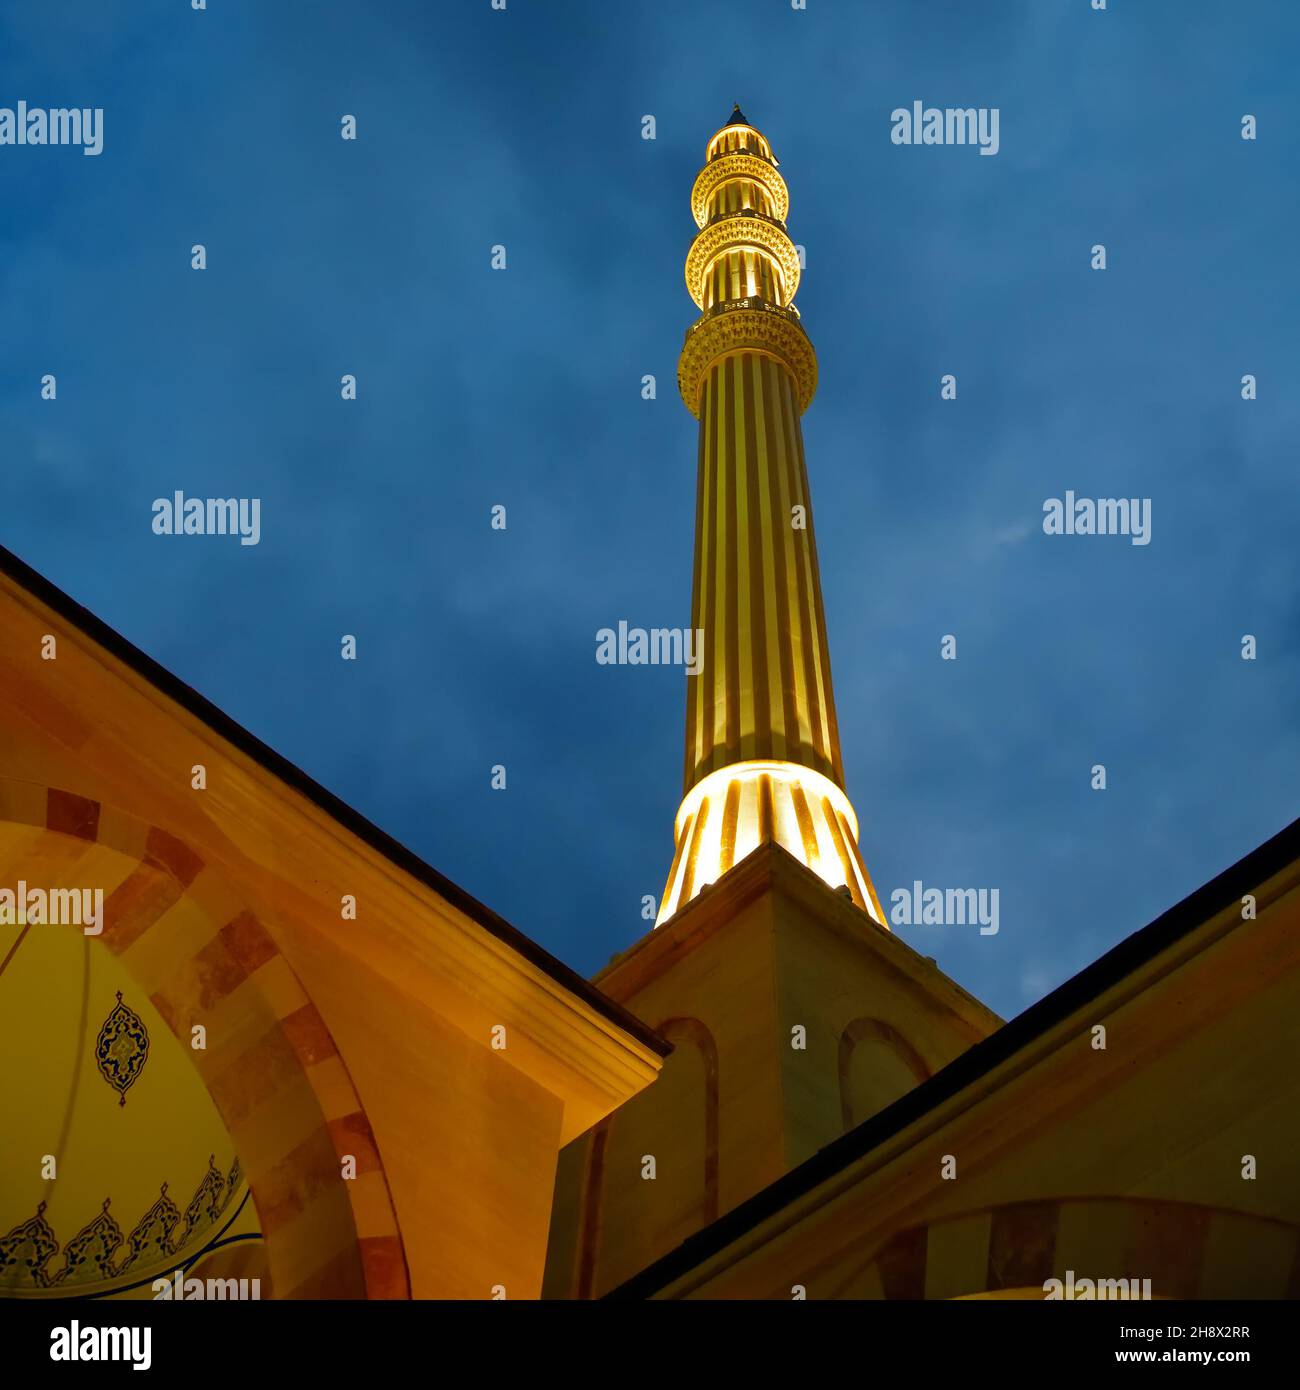 Grozny, Chechnya, Russia. View on the minaret of the Ahmad Kadyrov Mosque Heart of Chechnya shown at night. Selective focus on the minaret Stock Photo